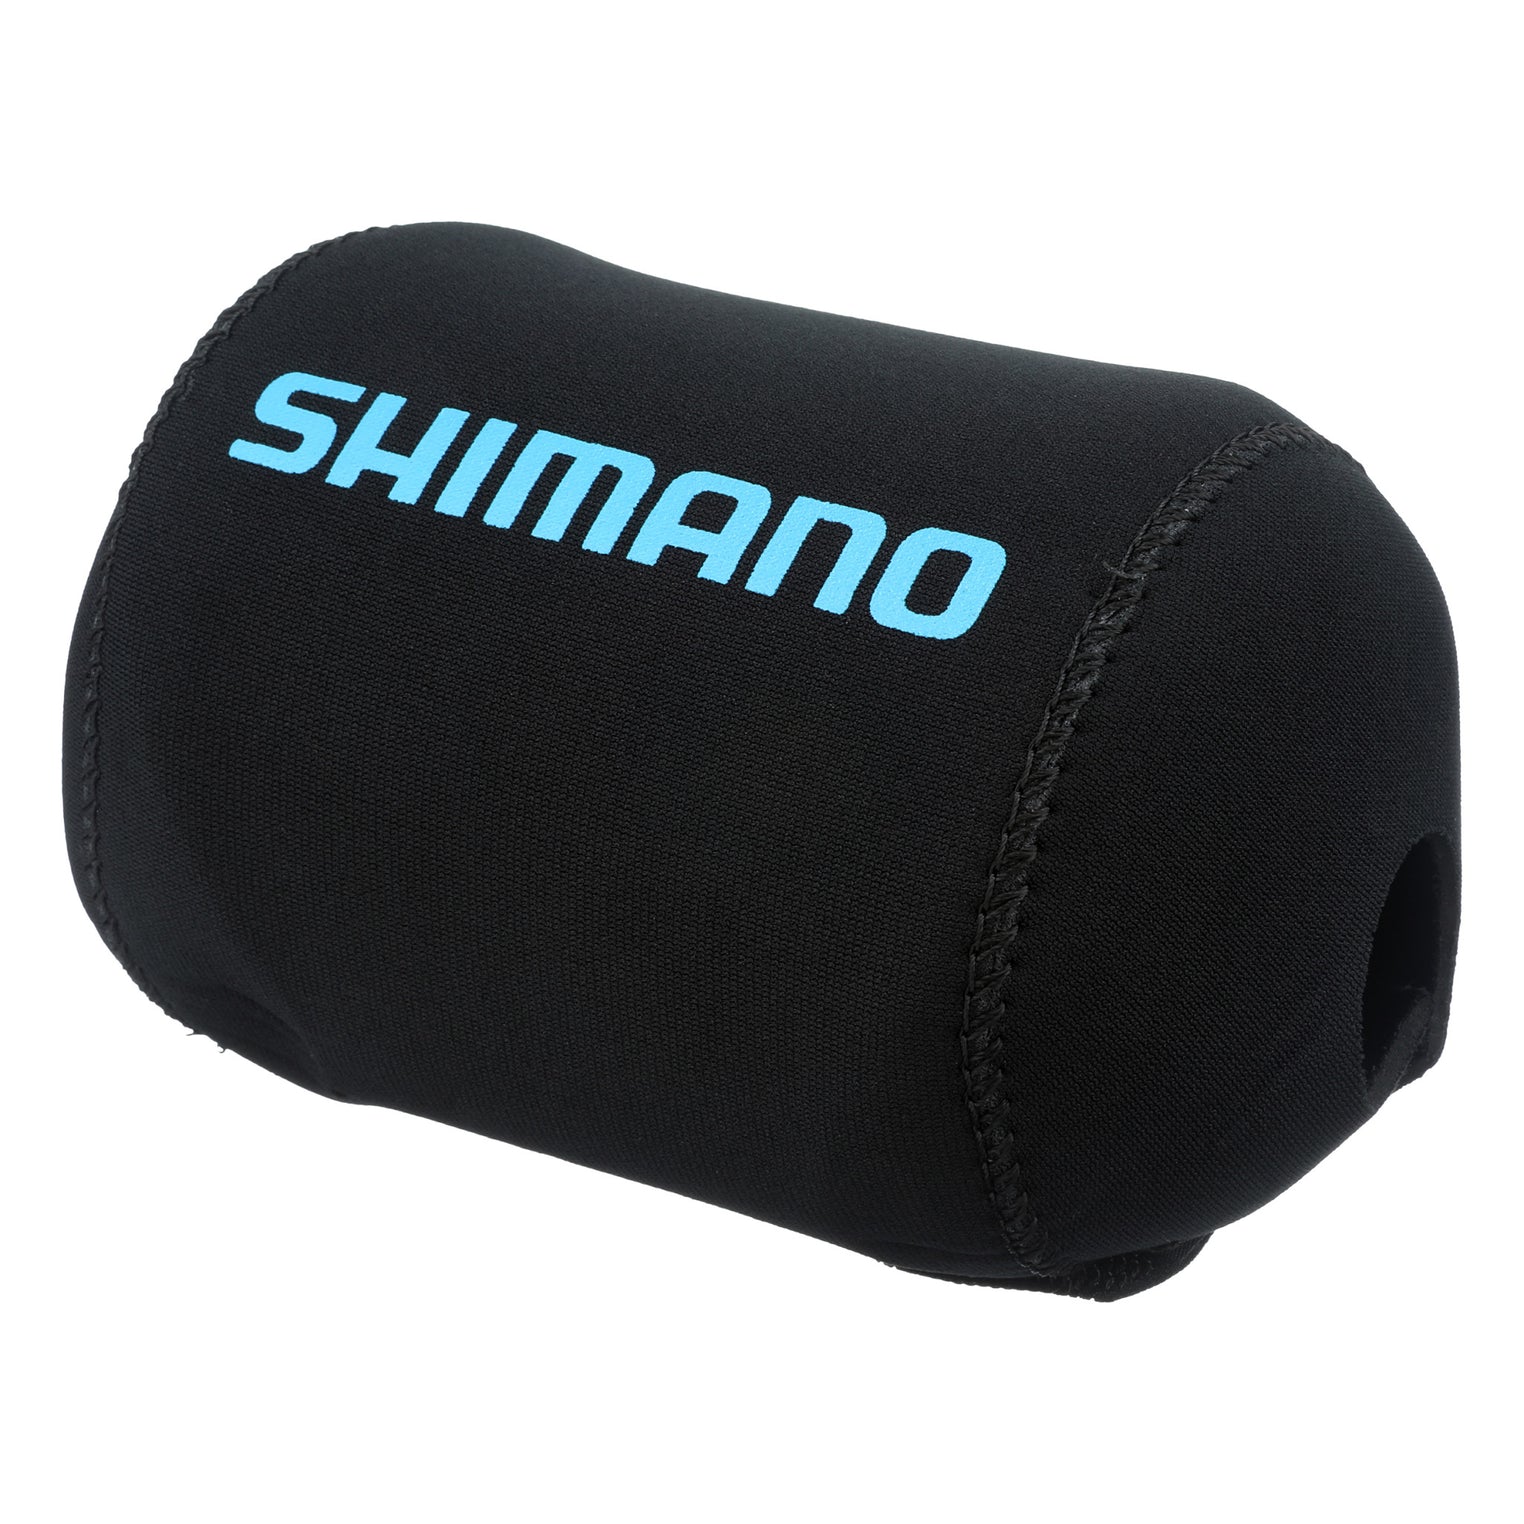 Small Mustad Neoprene Fishing Reel Cover to Suit Baitcaster Reels